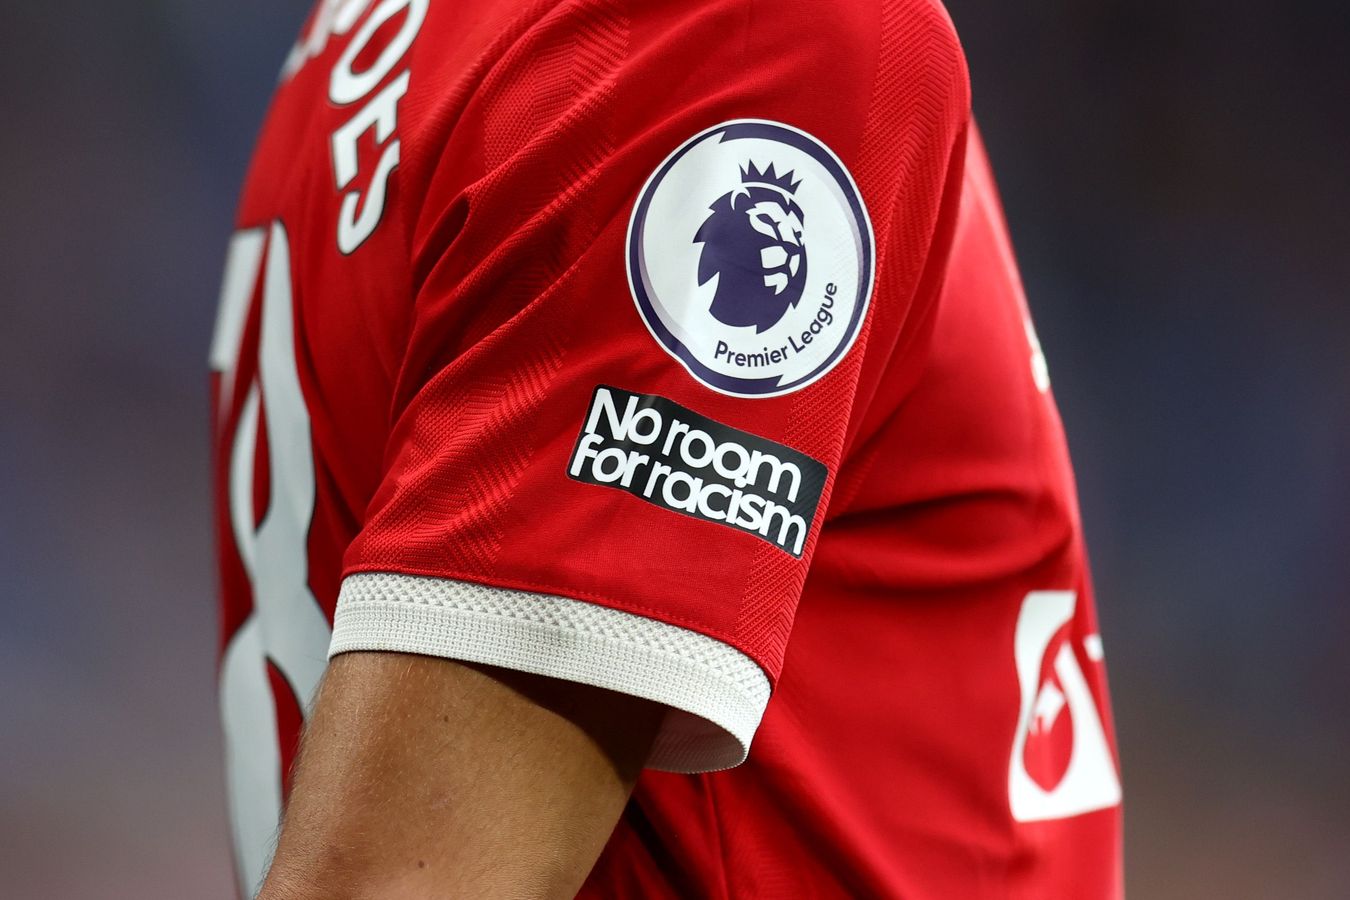 Leicester City v Manchester United - No Room For Racism sleeve badge